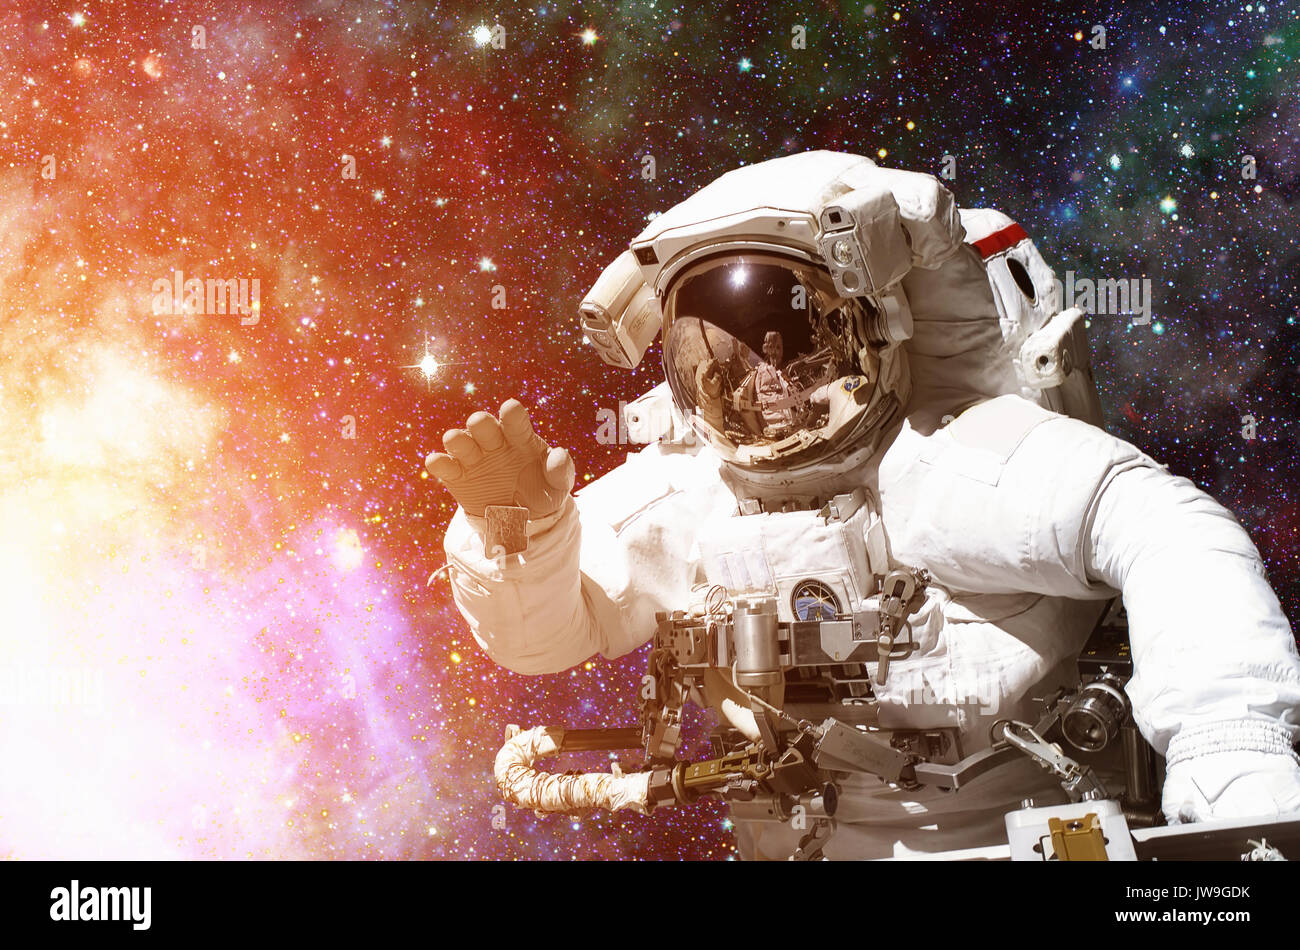 NASA space exploration astronaut. Elements of this image furnished by NASA. Stock Photo